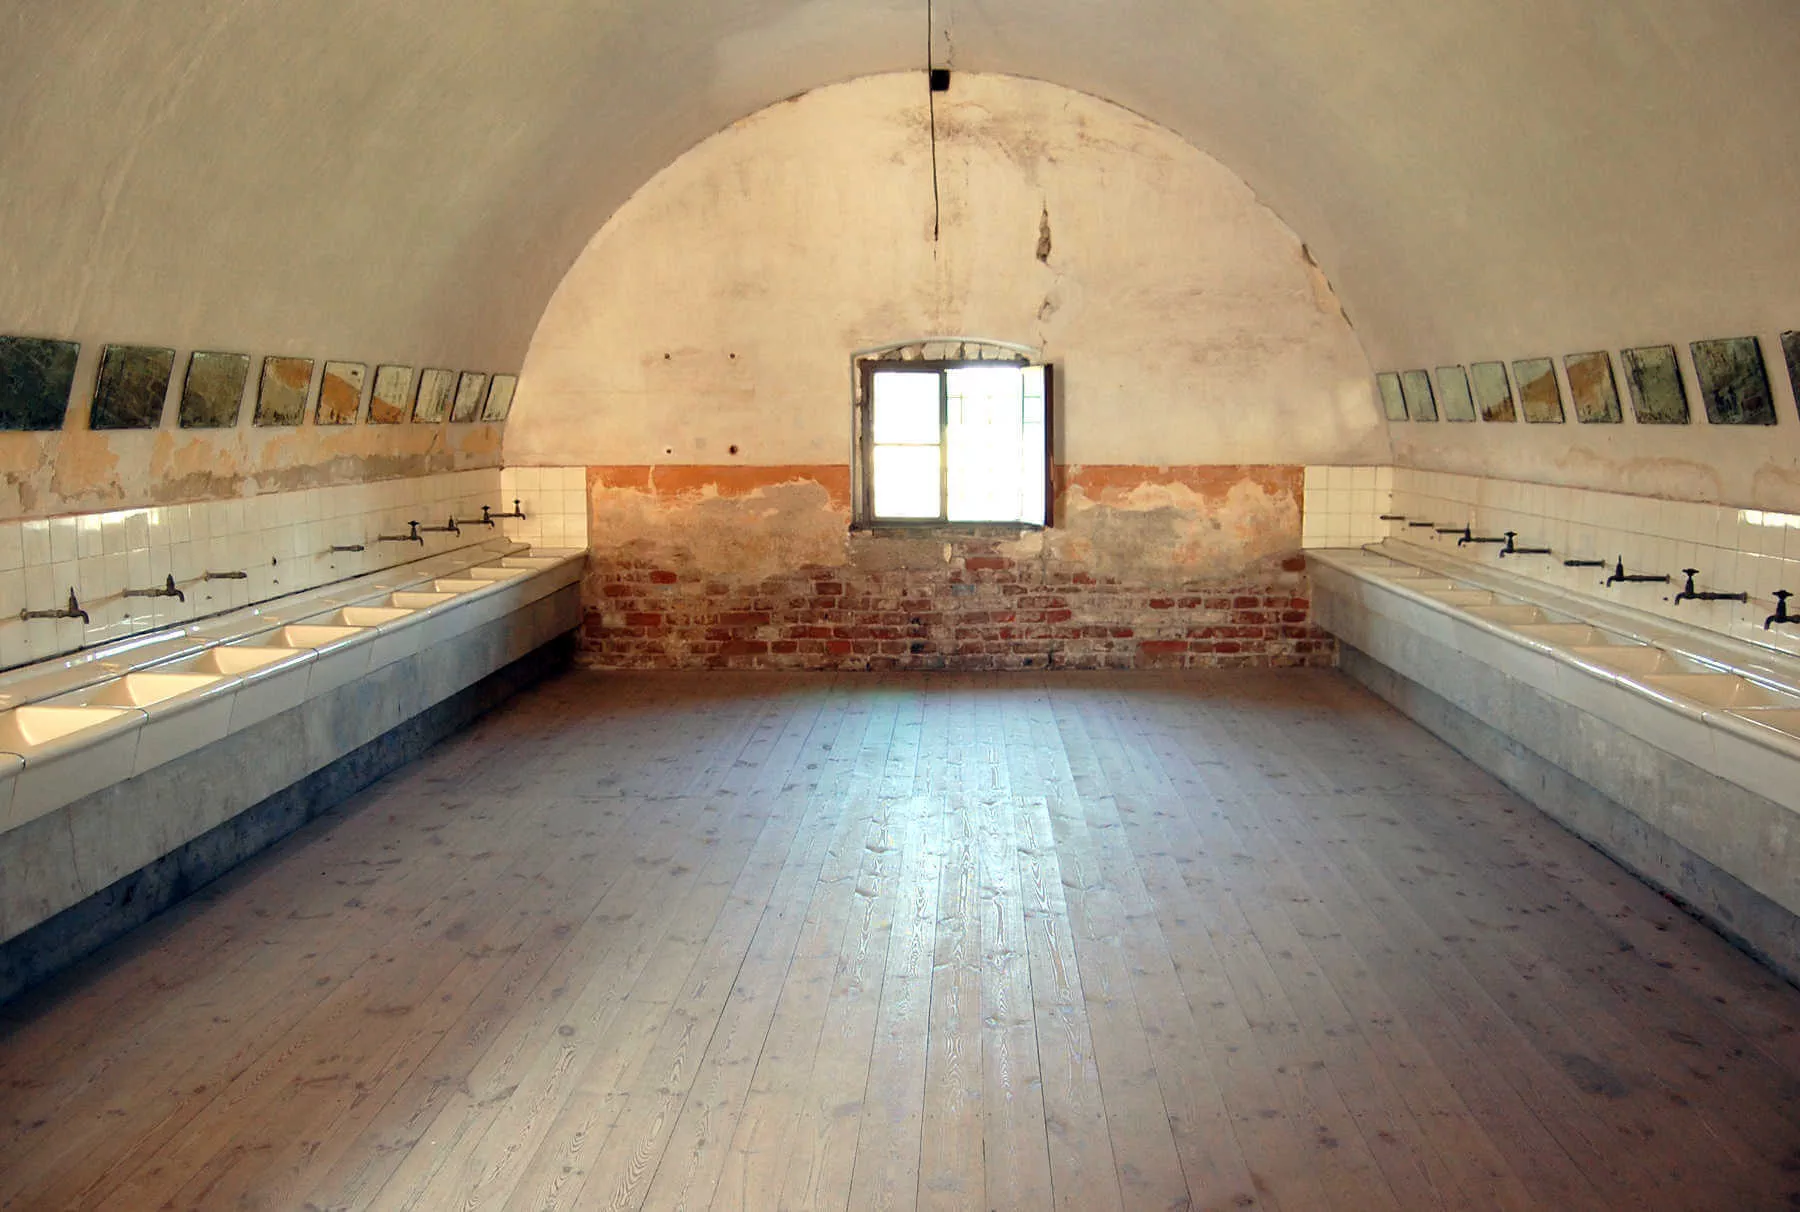 The washroom at Terezín Concentration Camp was built to fool Red Cross inspectors — no pipes were installed to bring in water